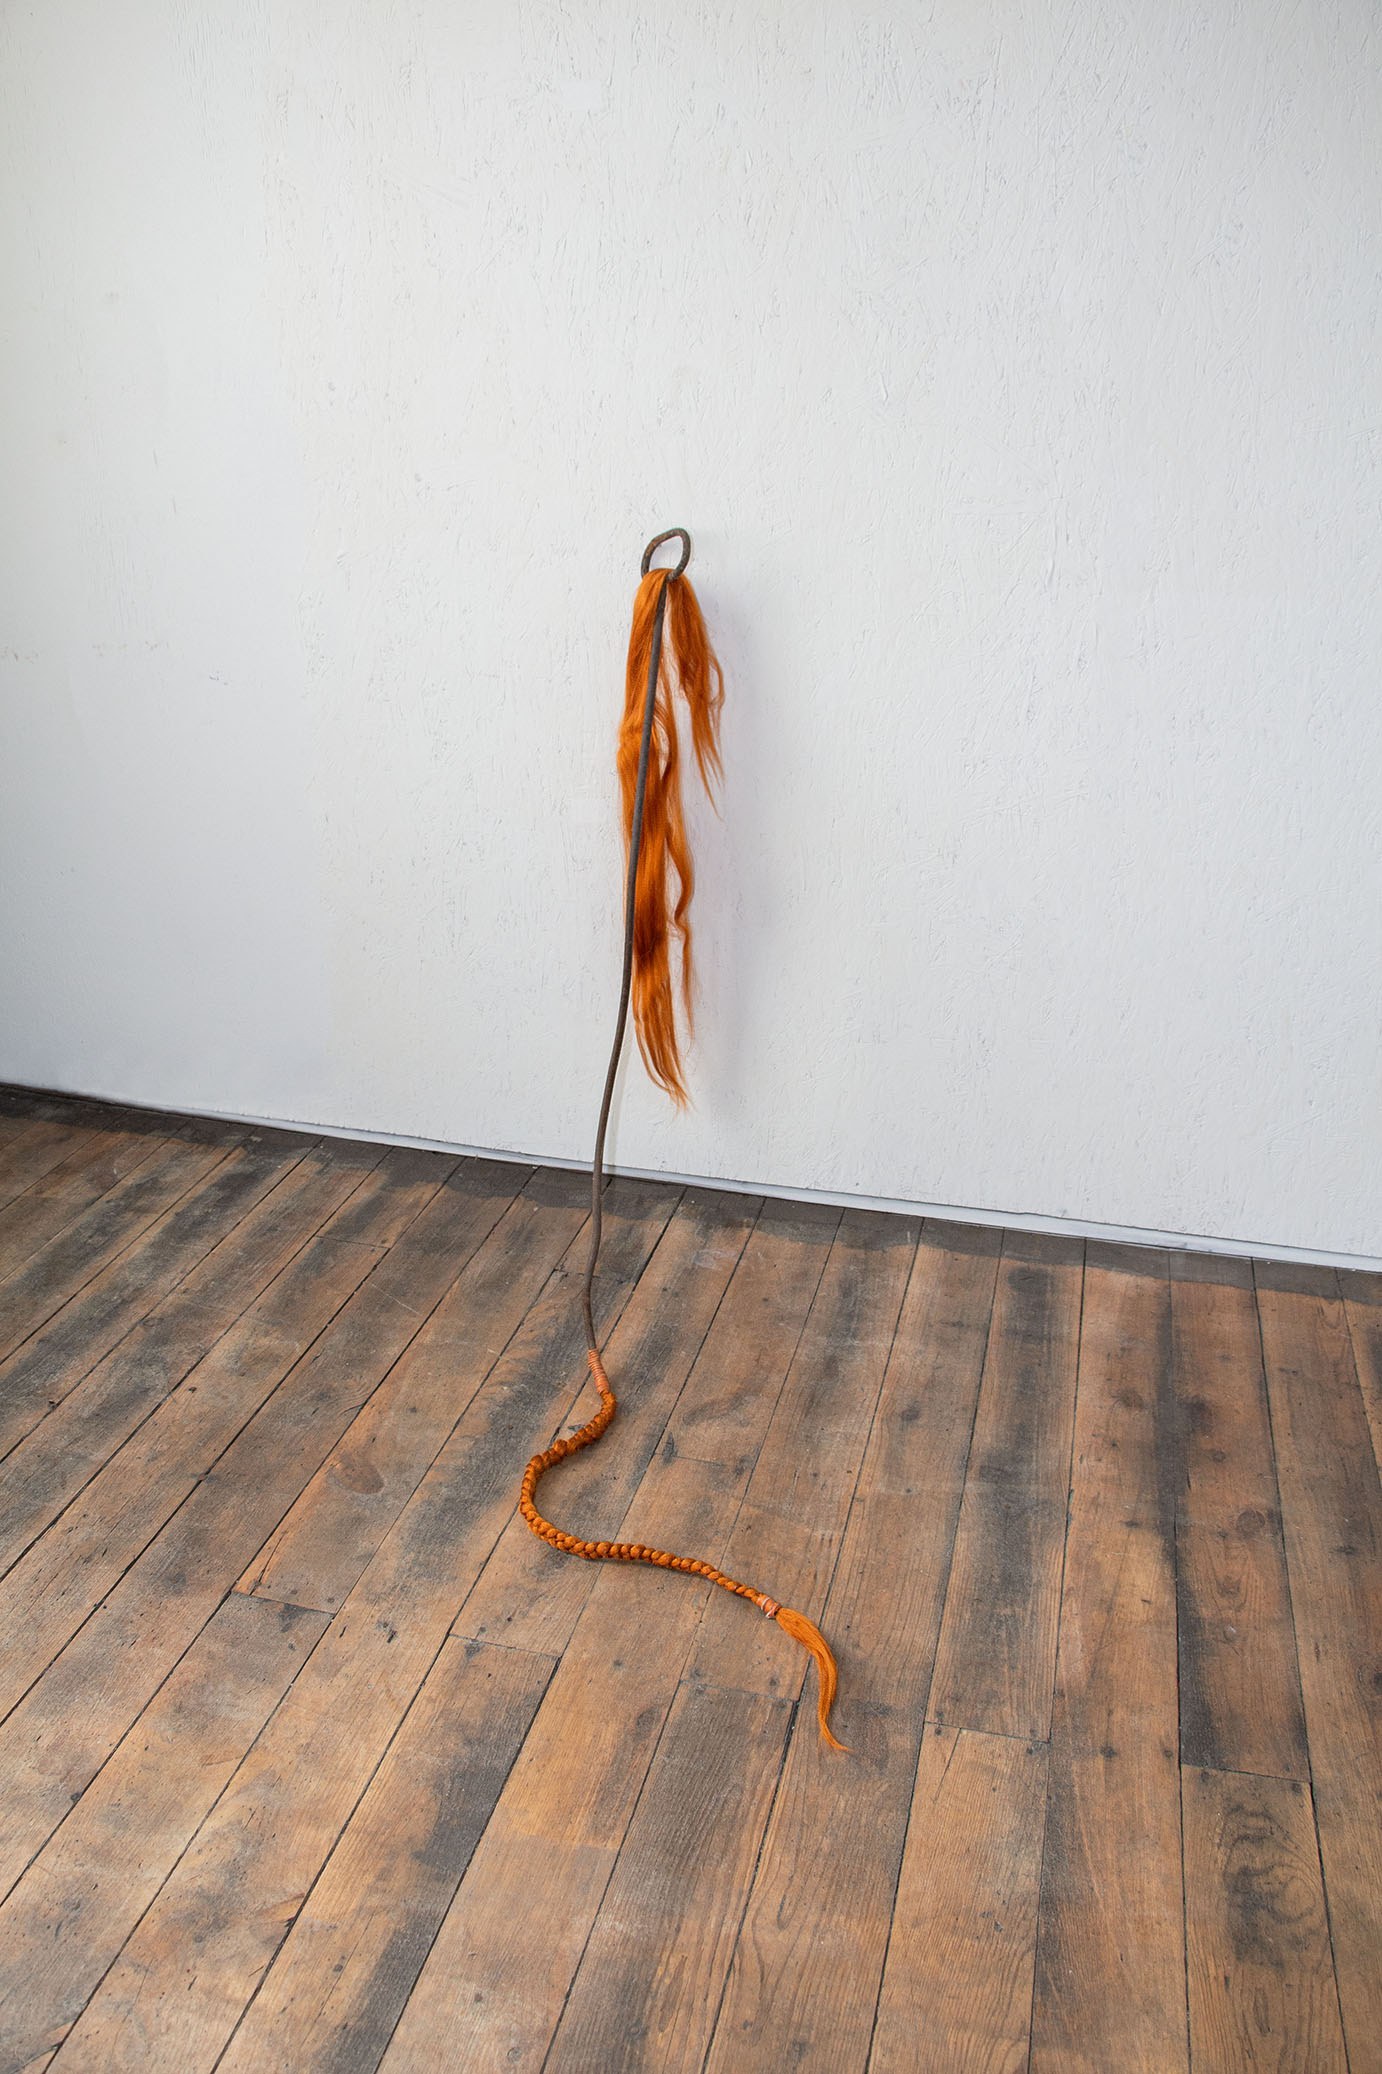 Cléo Sjölander, She can speak to snakes, 2023, synthetic hair, leather, rusty metal, 39x42x16in